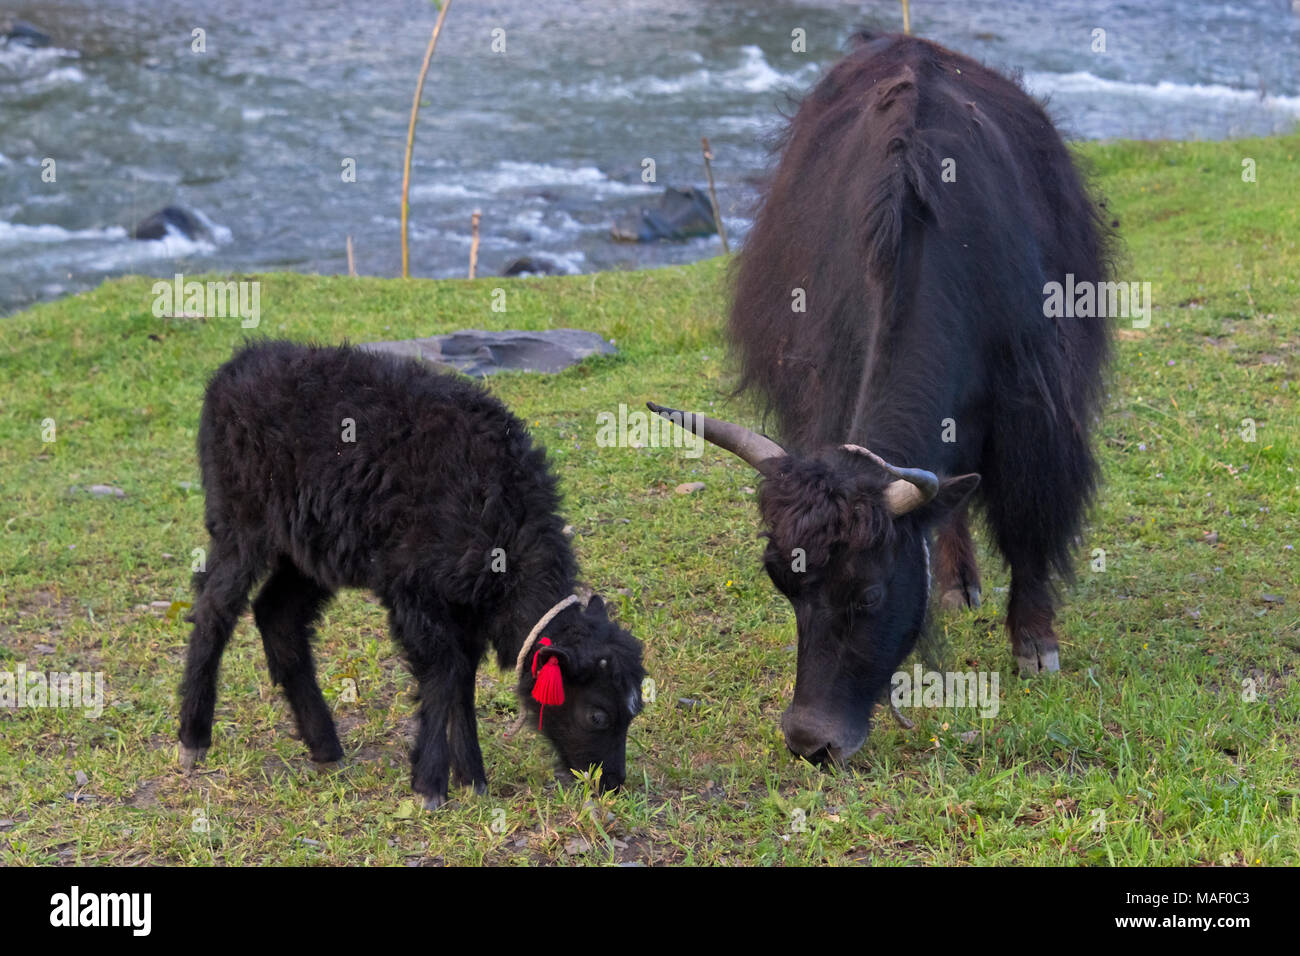 Baby yak with mother on the grass, Xinduqiao, western Sichuan, China Stock Photo